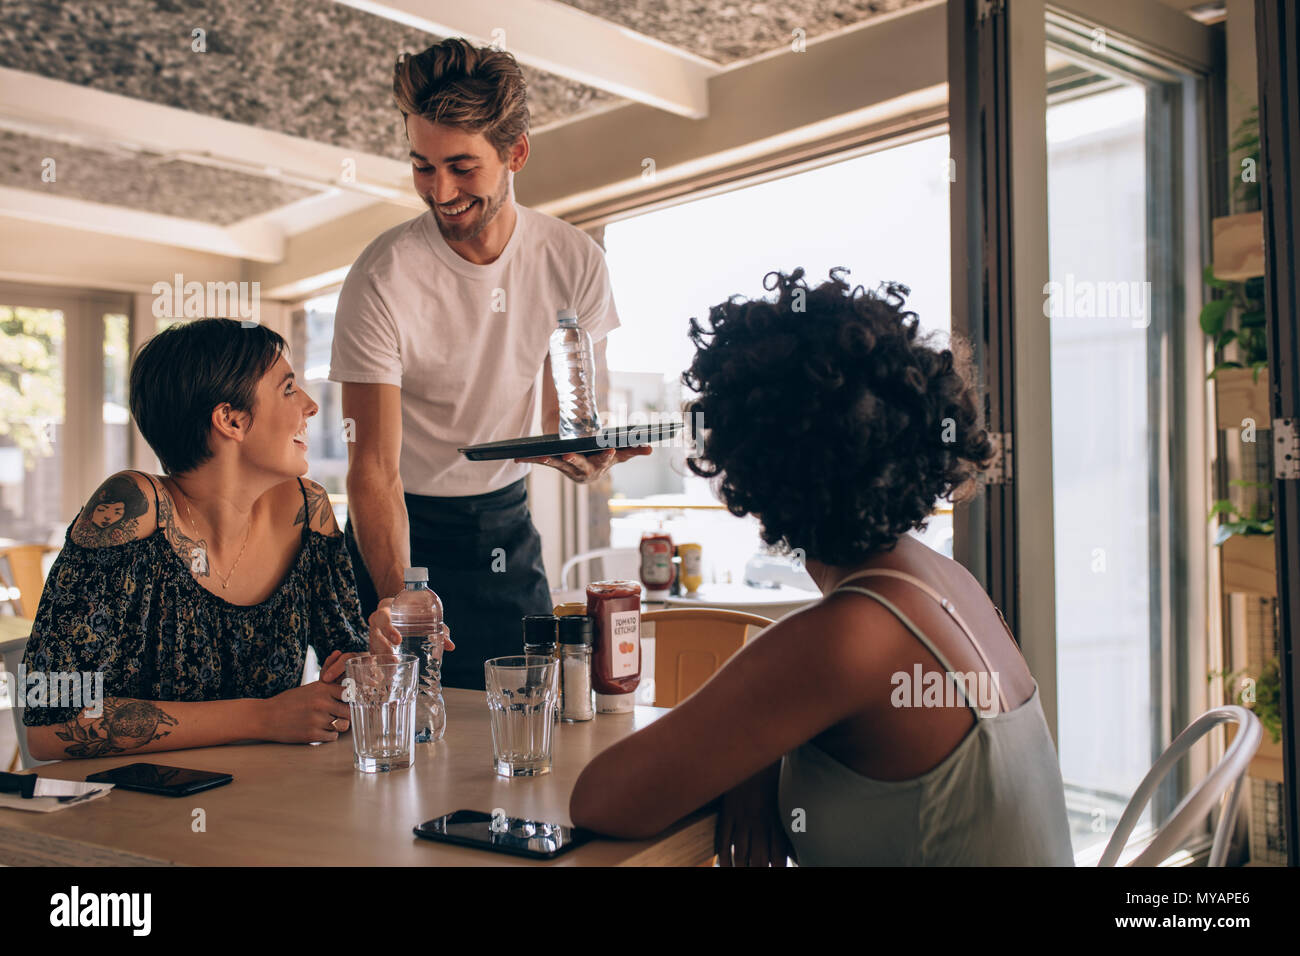 Male waiter serving water to women at cafe. Female friends at a restaurant with waiter serving water. Stock Photo